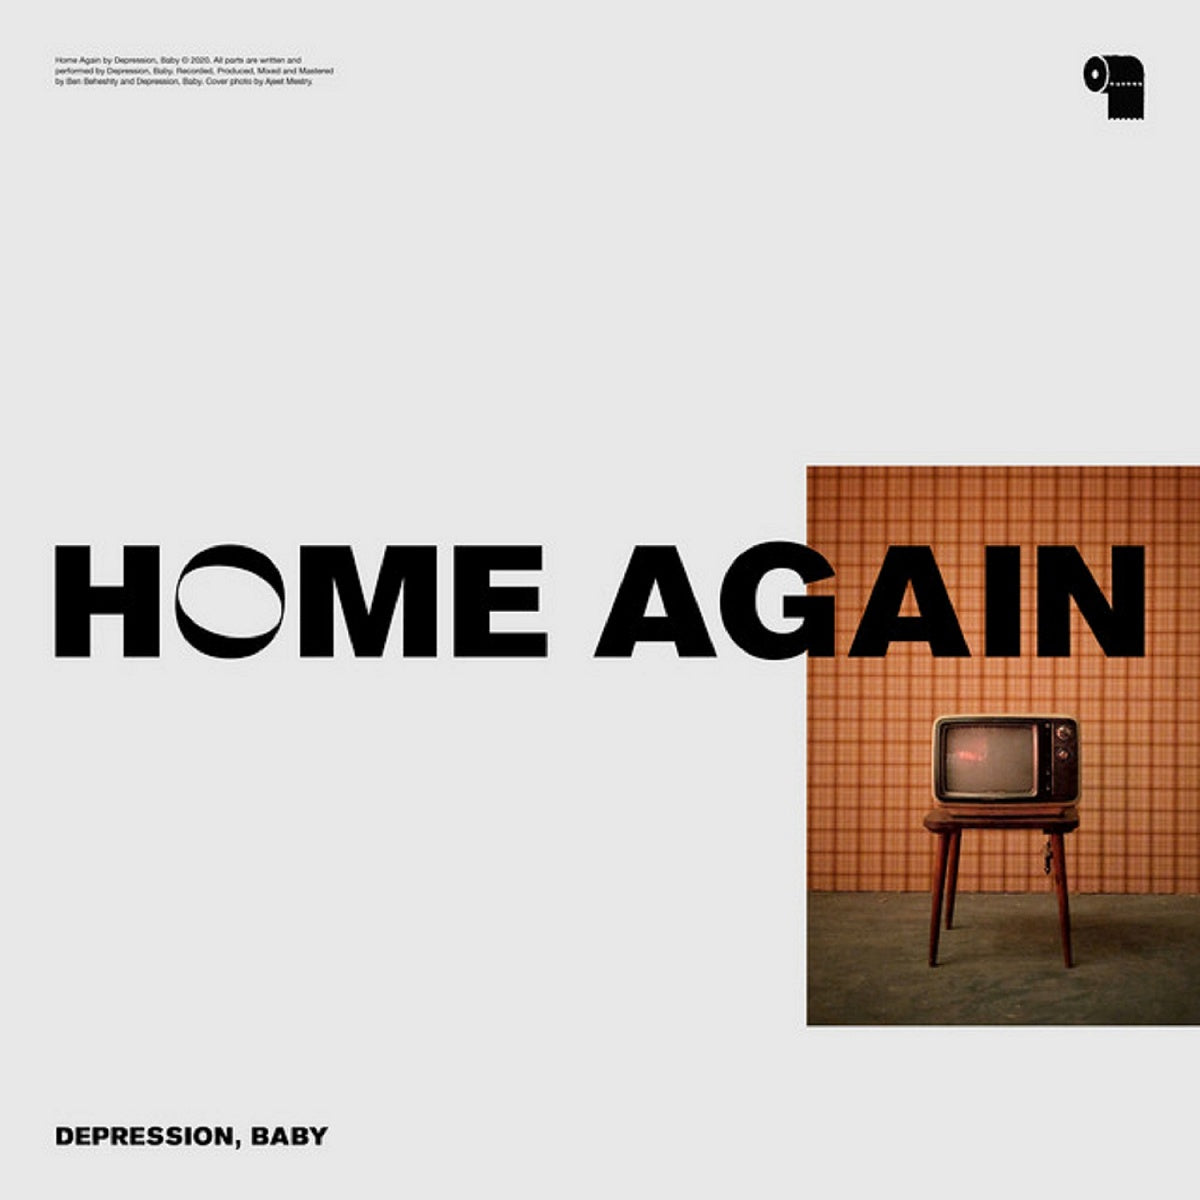 Depression, Baby – ‘Home Again’